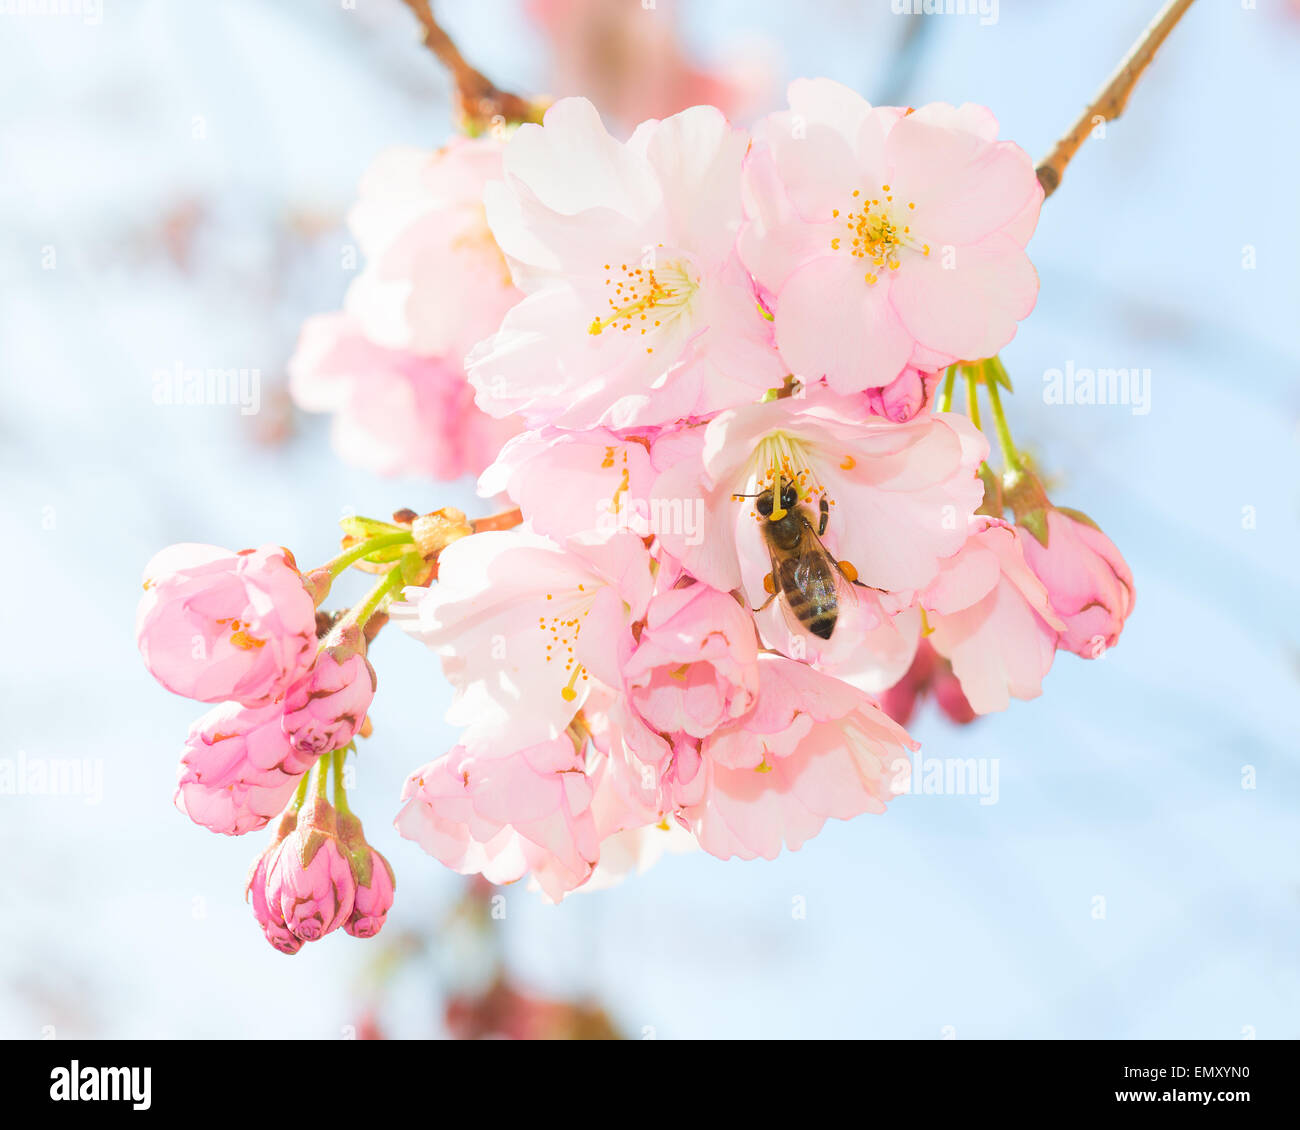 Honey bee pollinating springtime blooming orchard fruit garden and obtaining nectar and pollen from pink spring blossom flowers Stock Photo